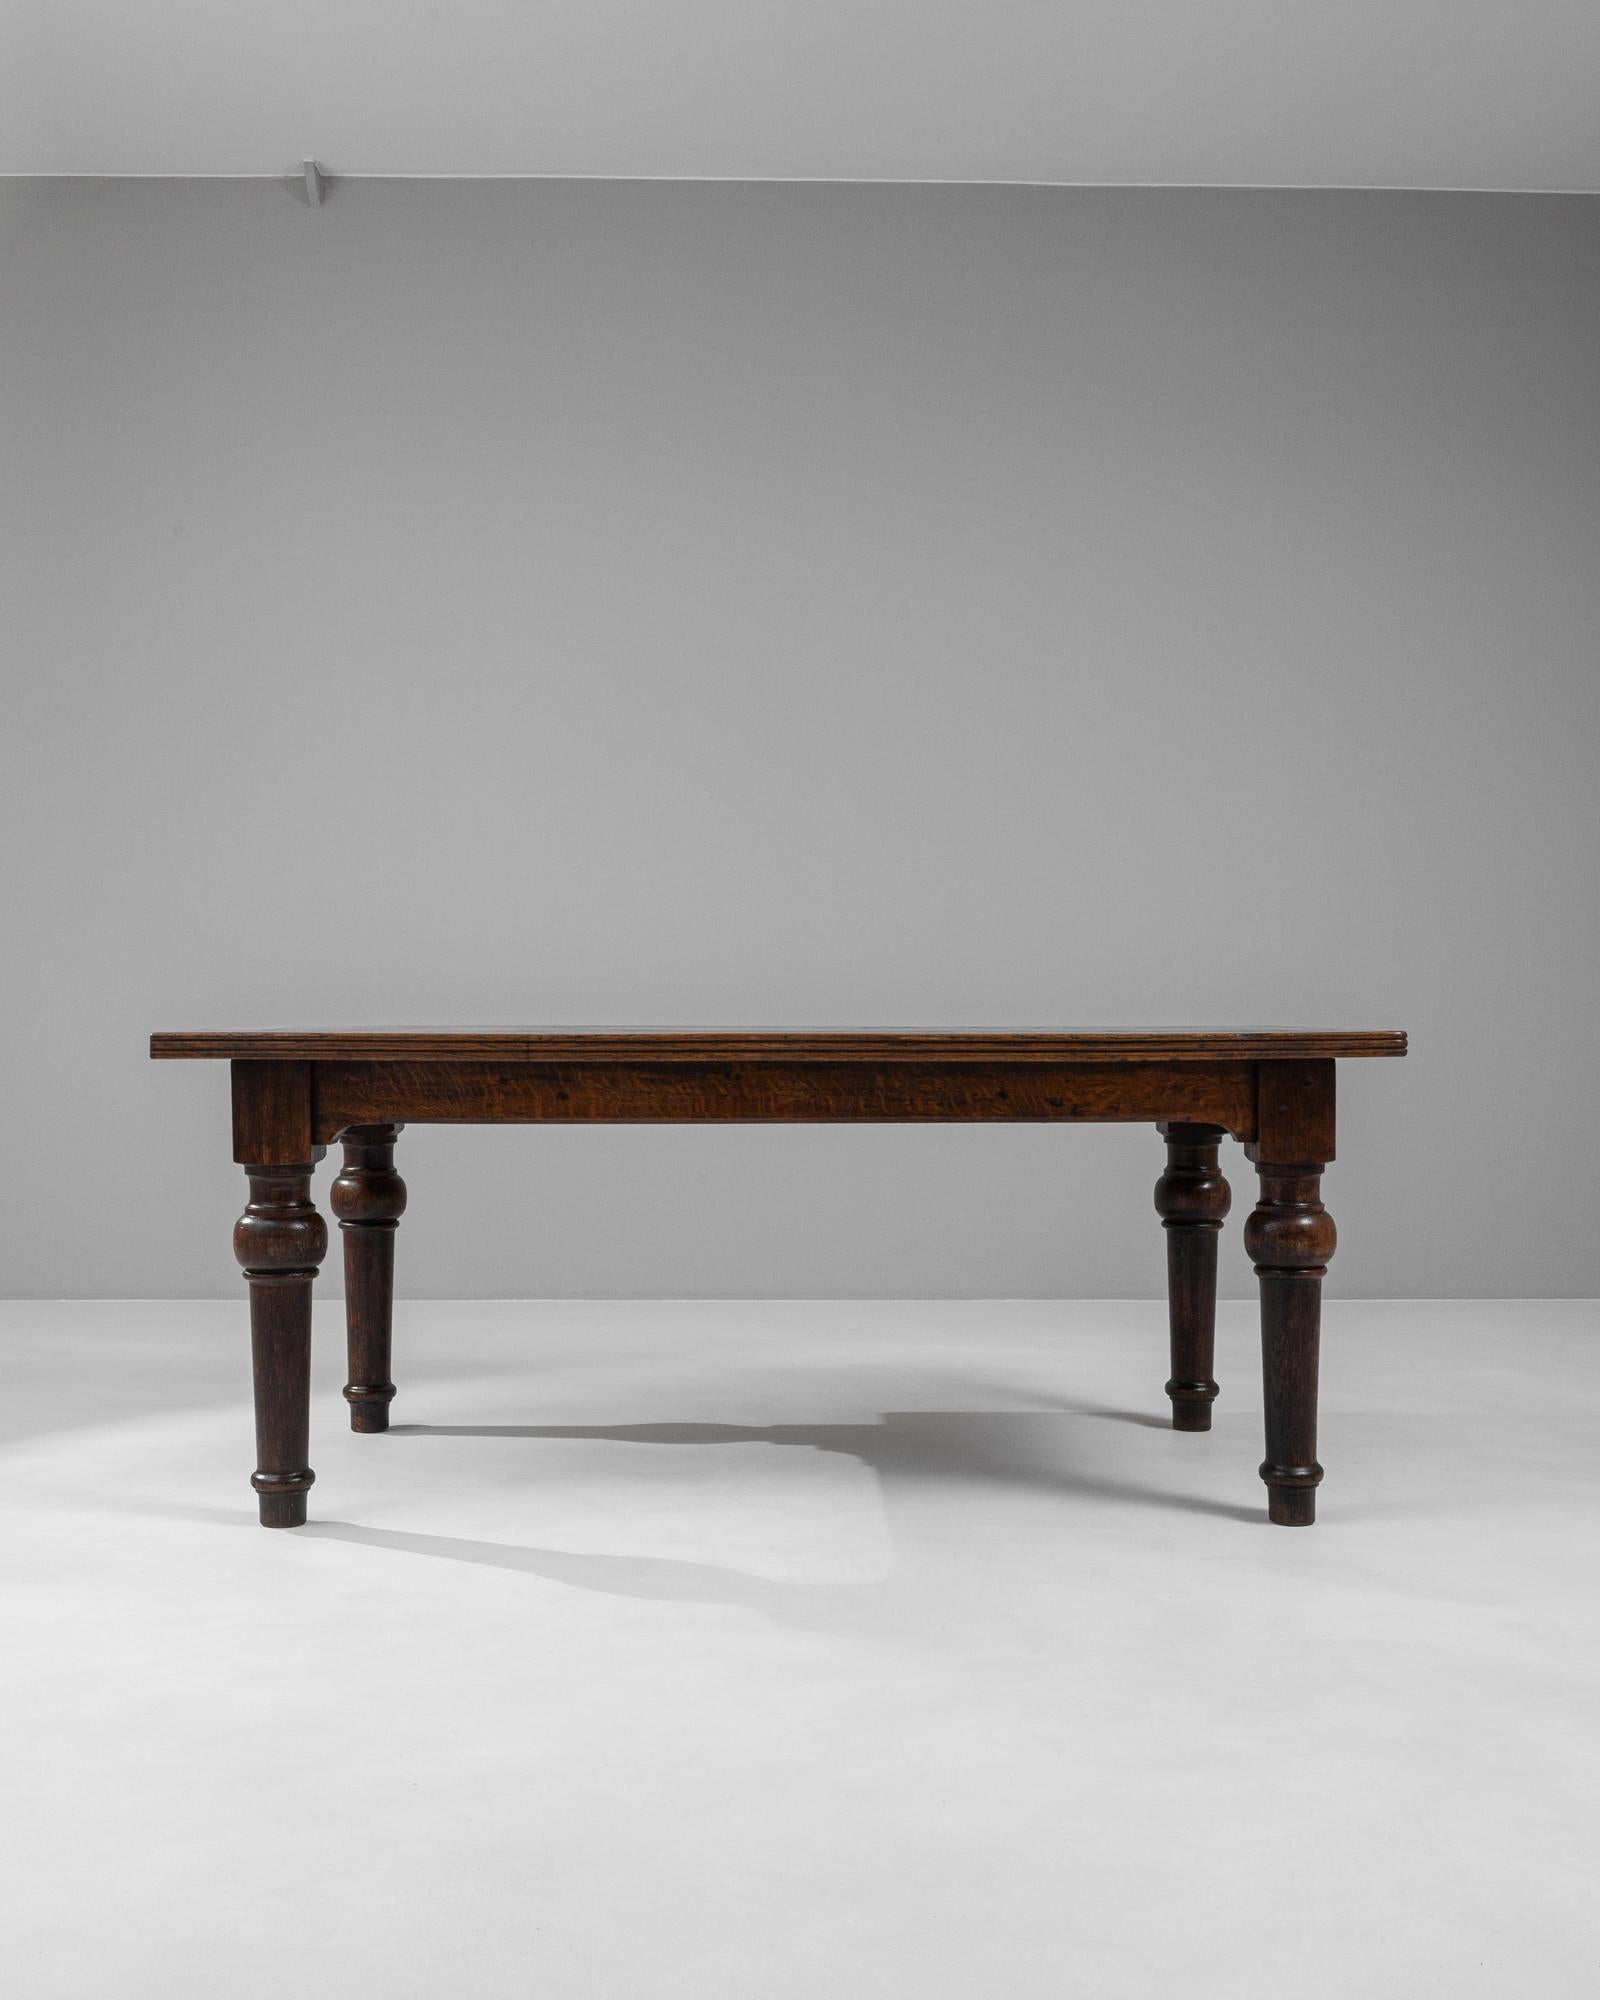 This exquisite 19th-century French wooden dining table radiates the grandeur and charm of its era. Constructed from rich, dark wood, the table features a robust, rectangular top that rests on sturdy, elegantly turned legs. Each leg is connected by